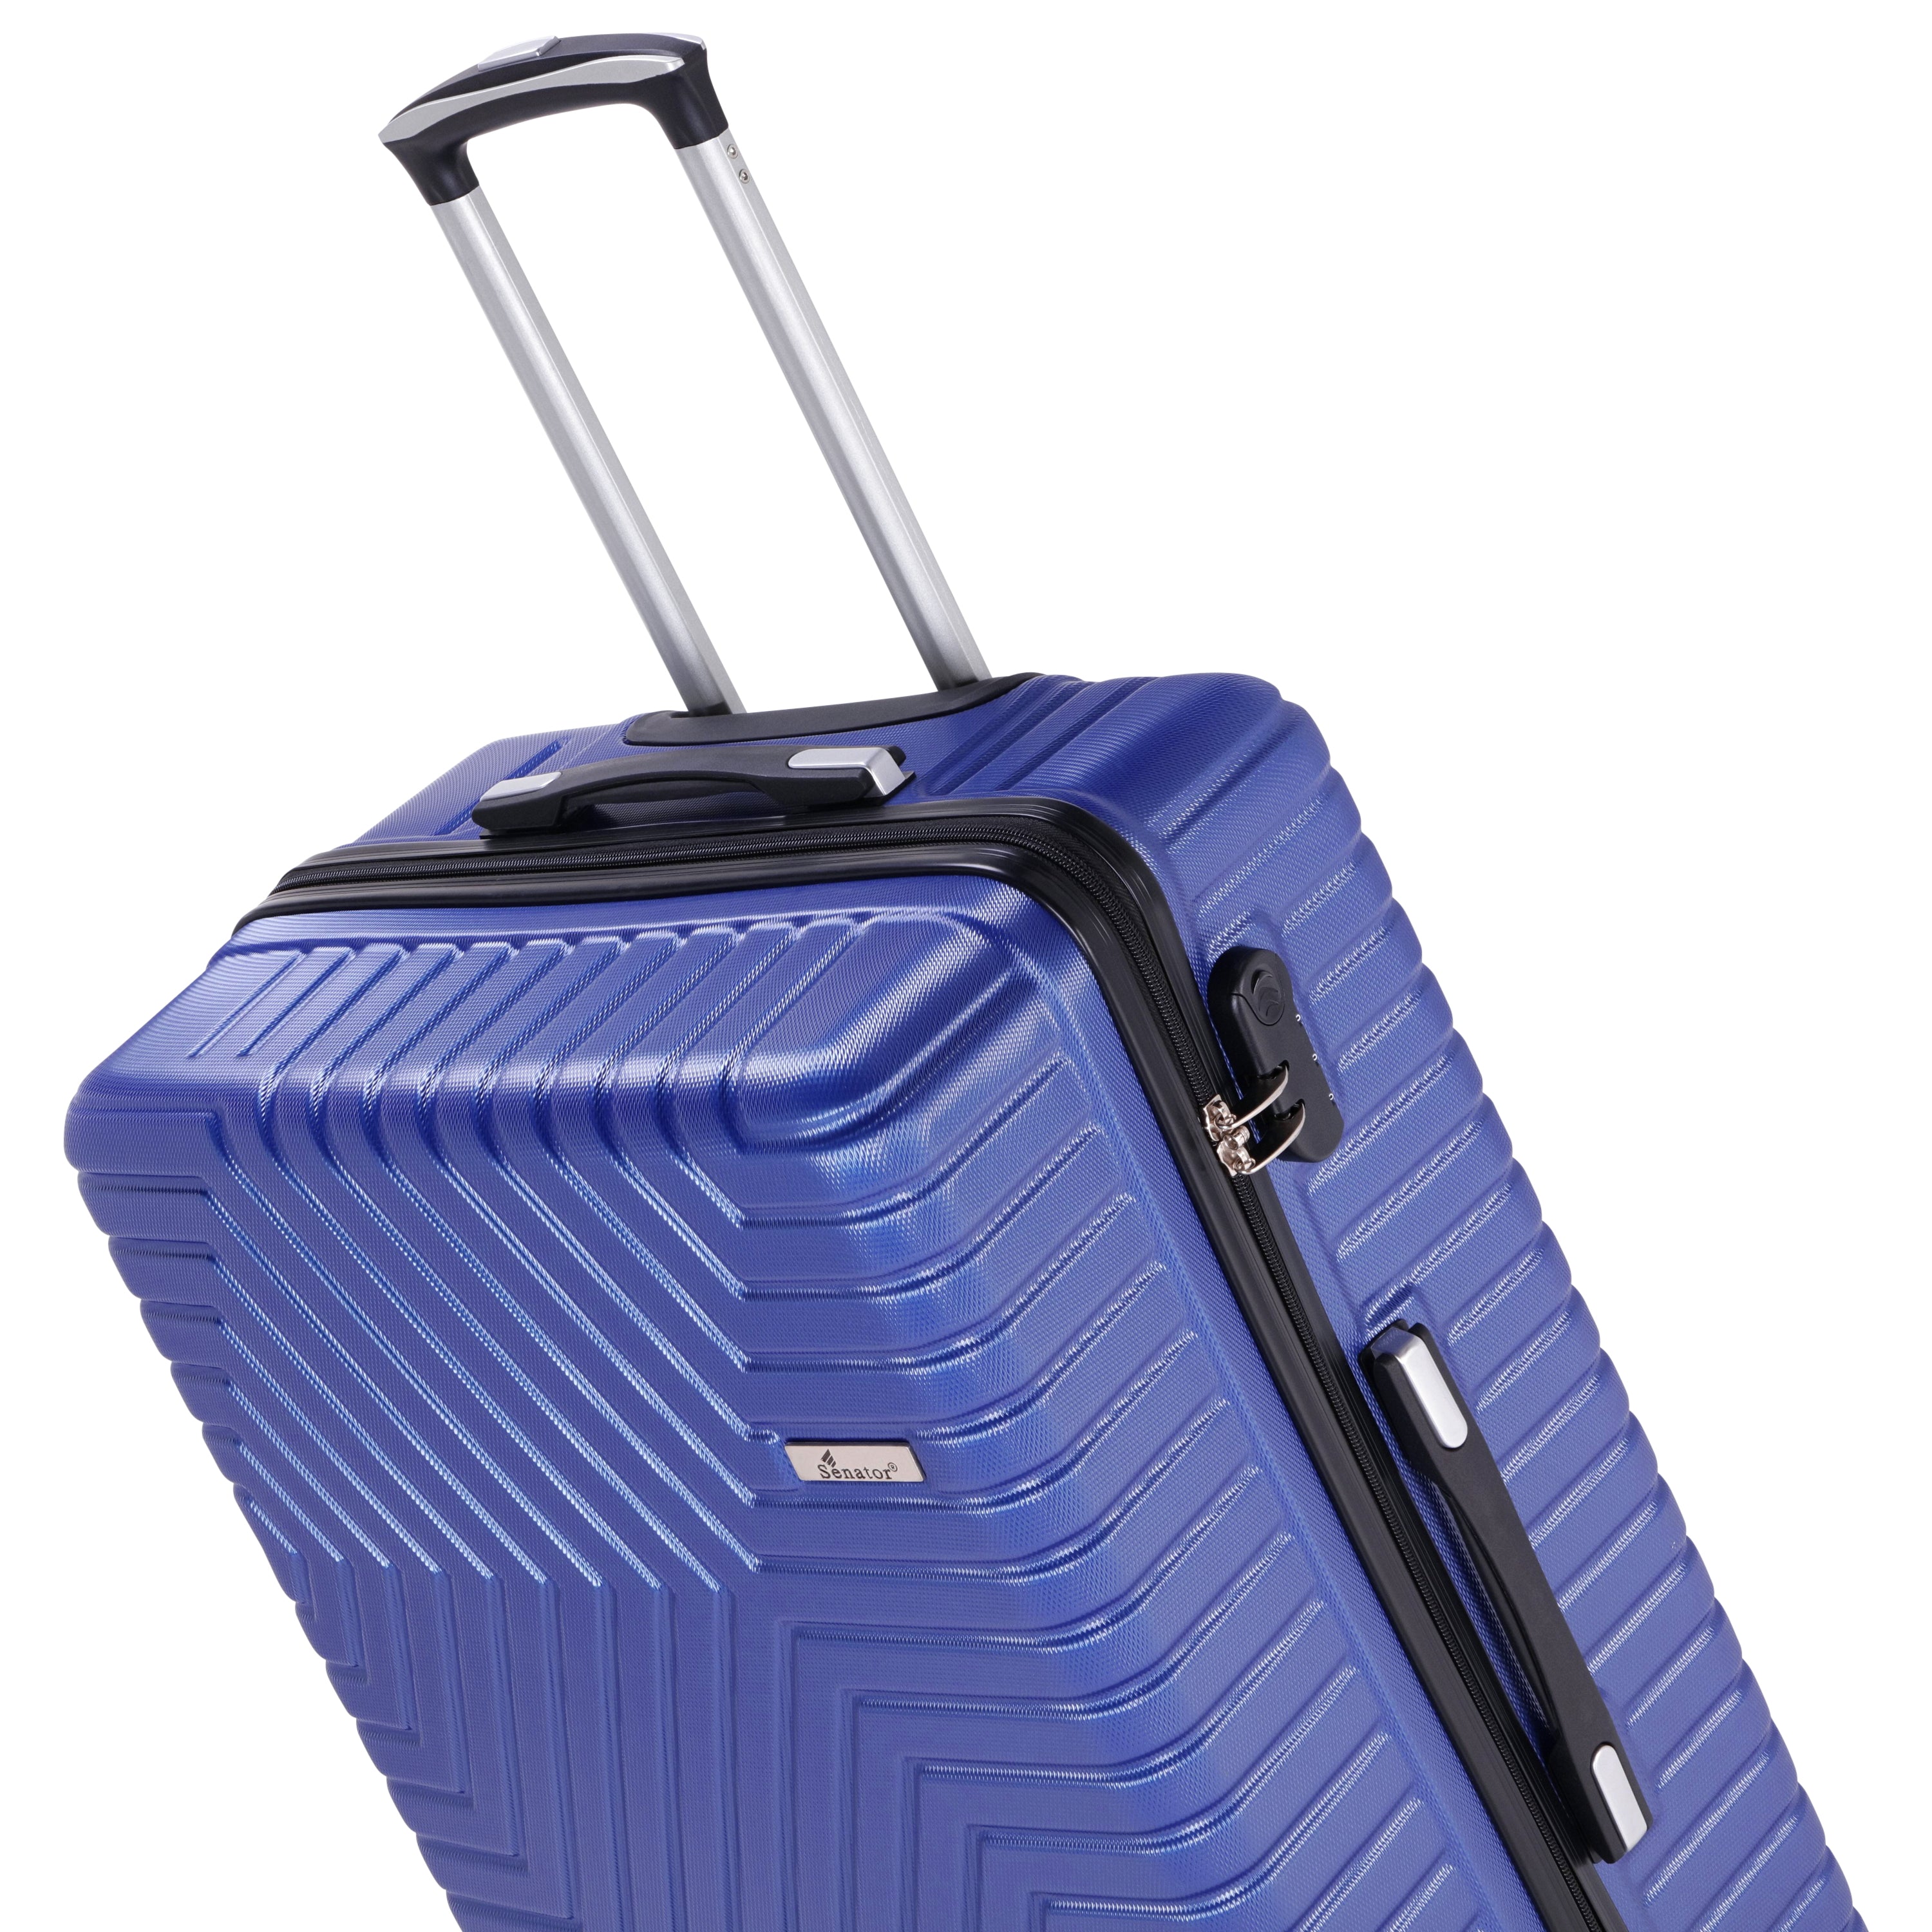 Cabin size Carry-on trolley by Senator luggage (KH9035-20) - buyluggageonline